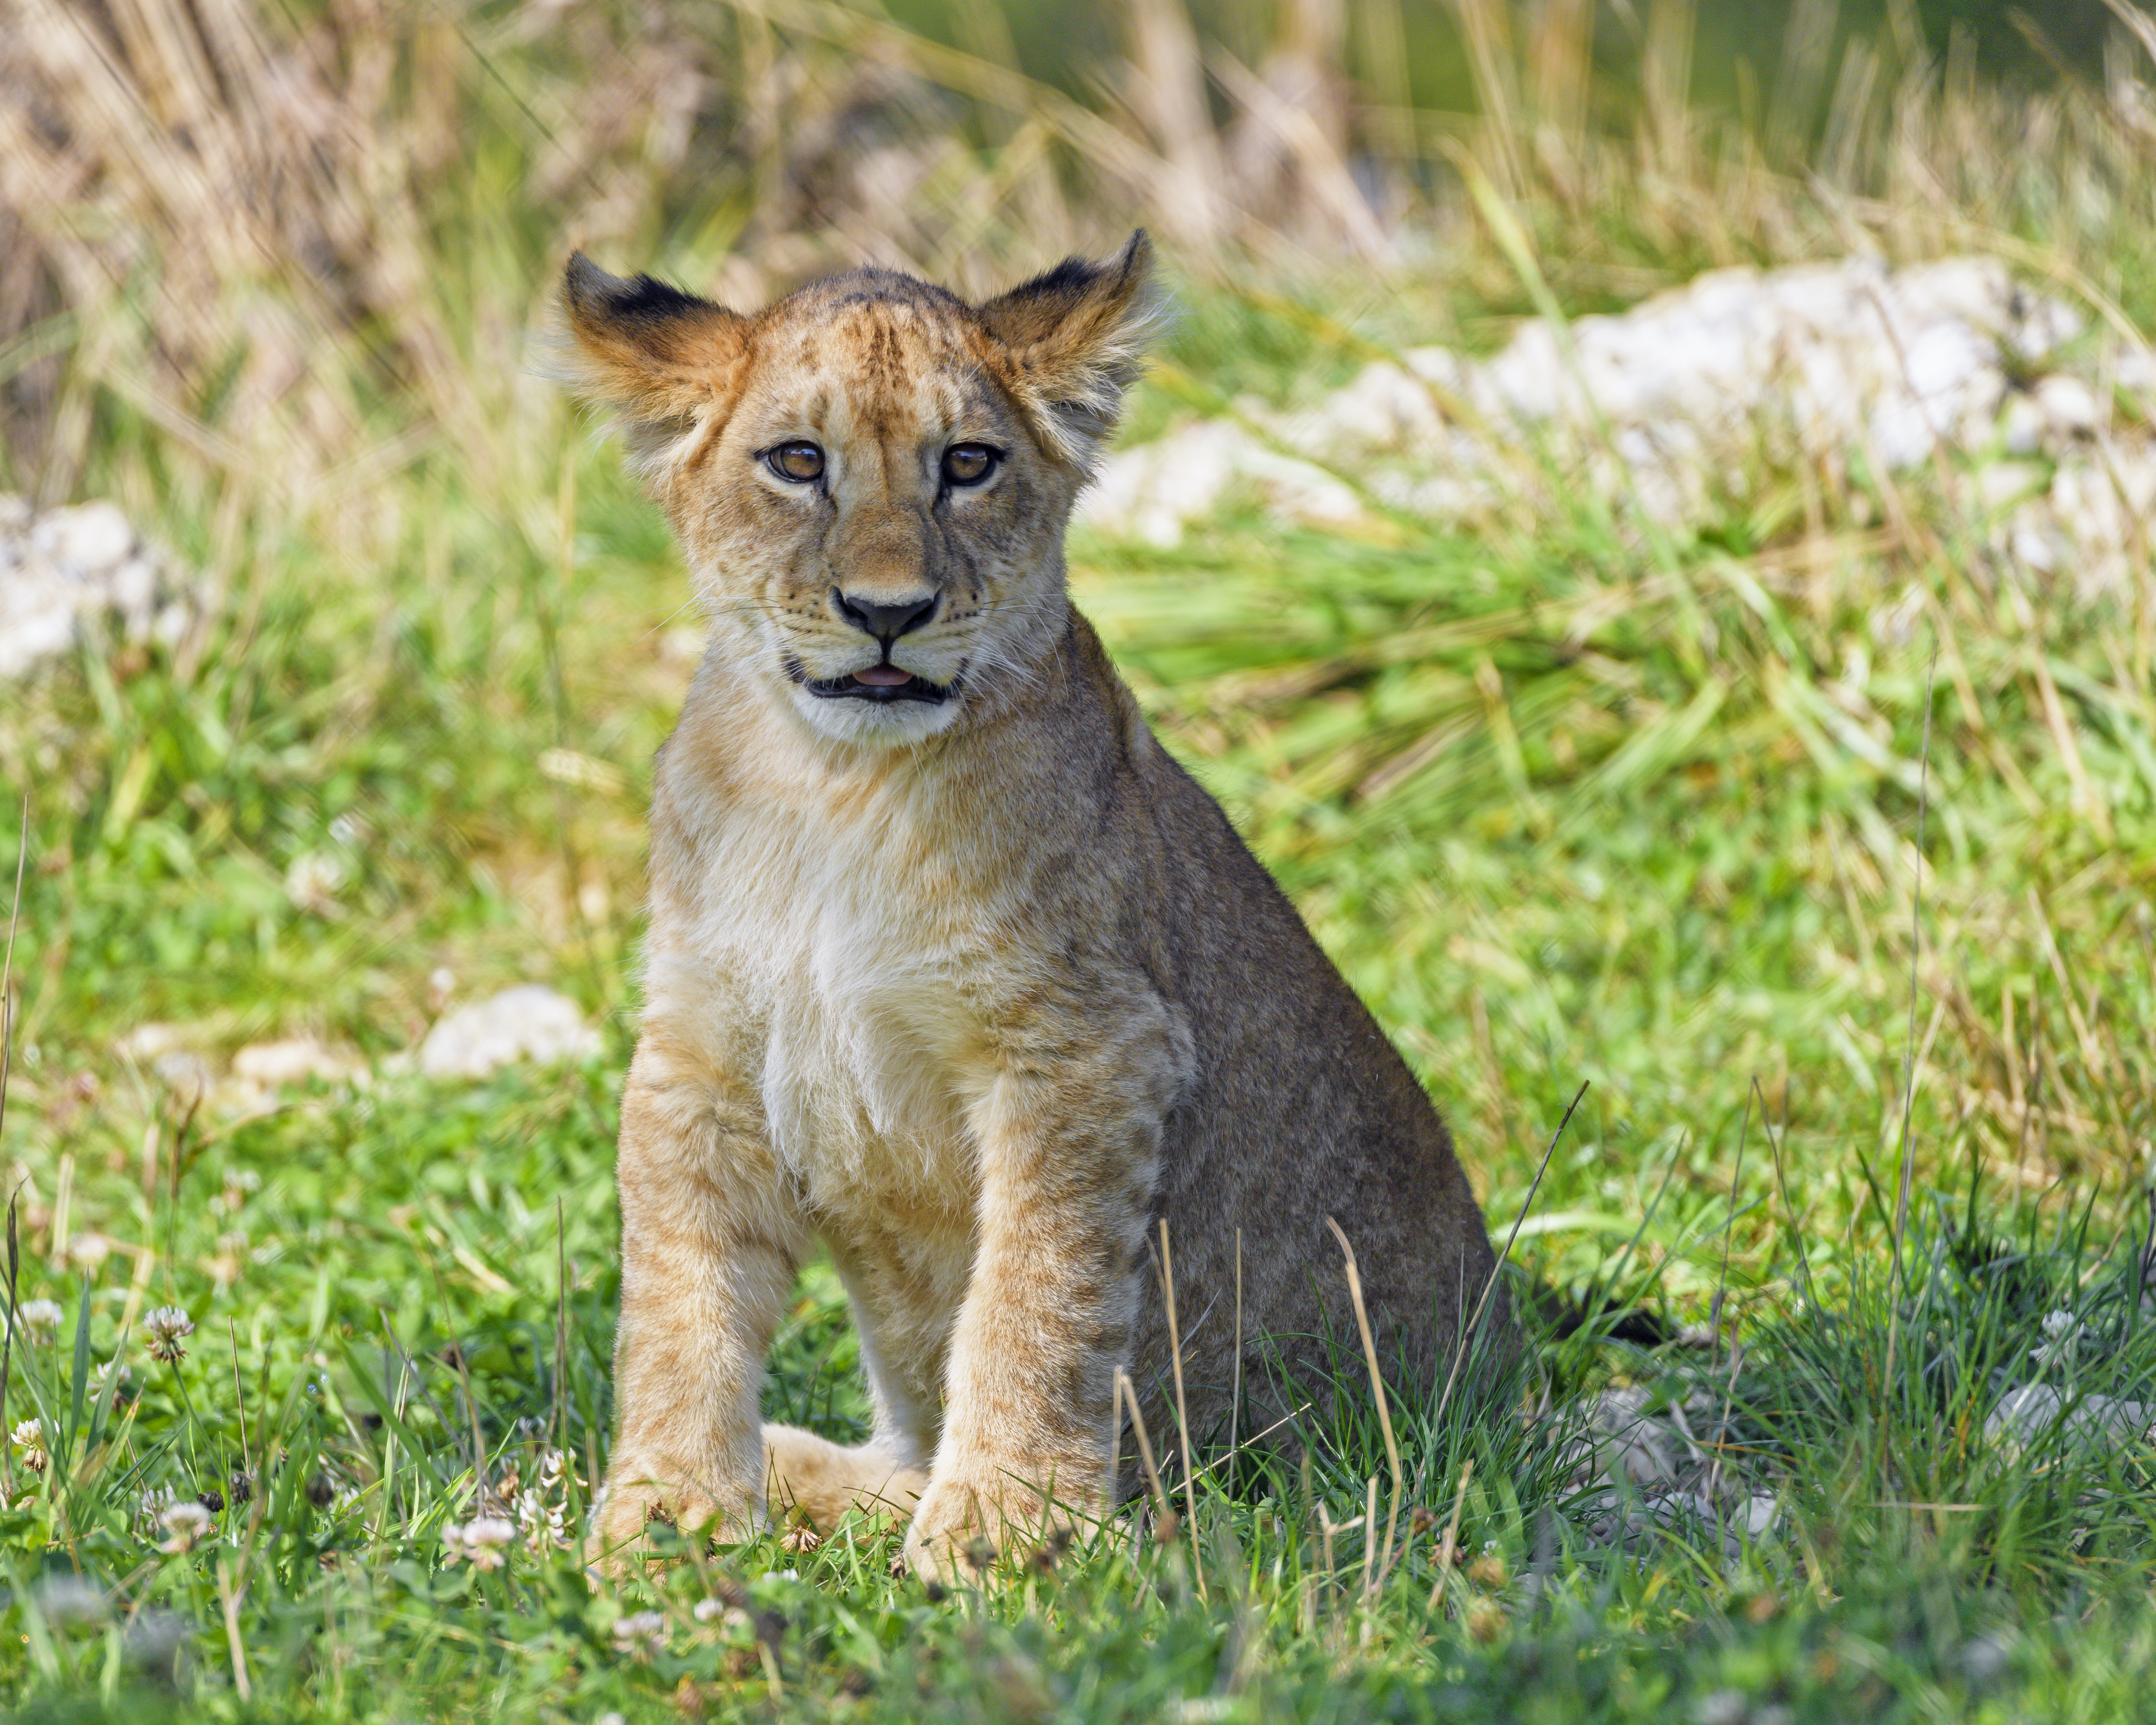 opinion, animals, grass, young, lion, predator, sight, joey, lion cub wallpaper for mobile